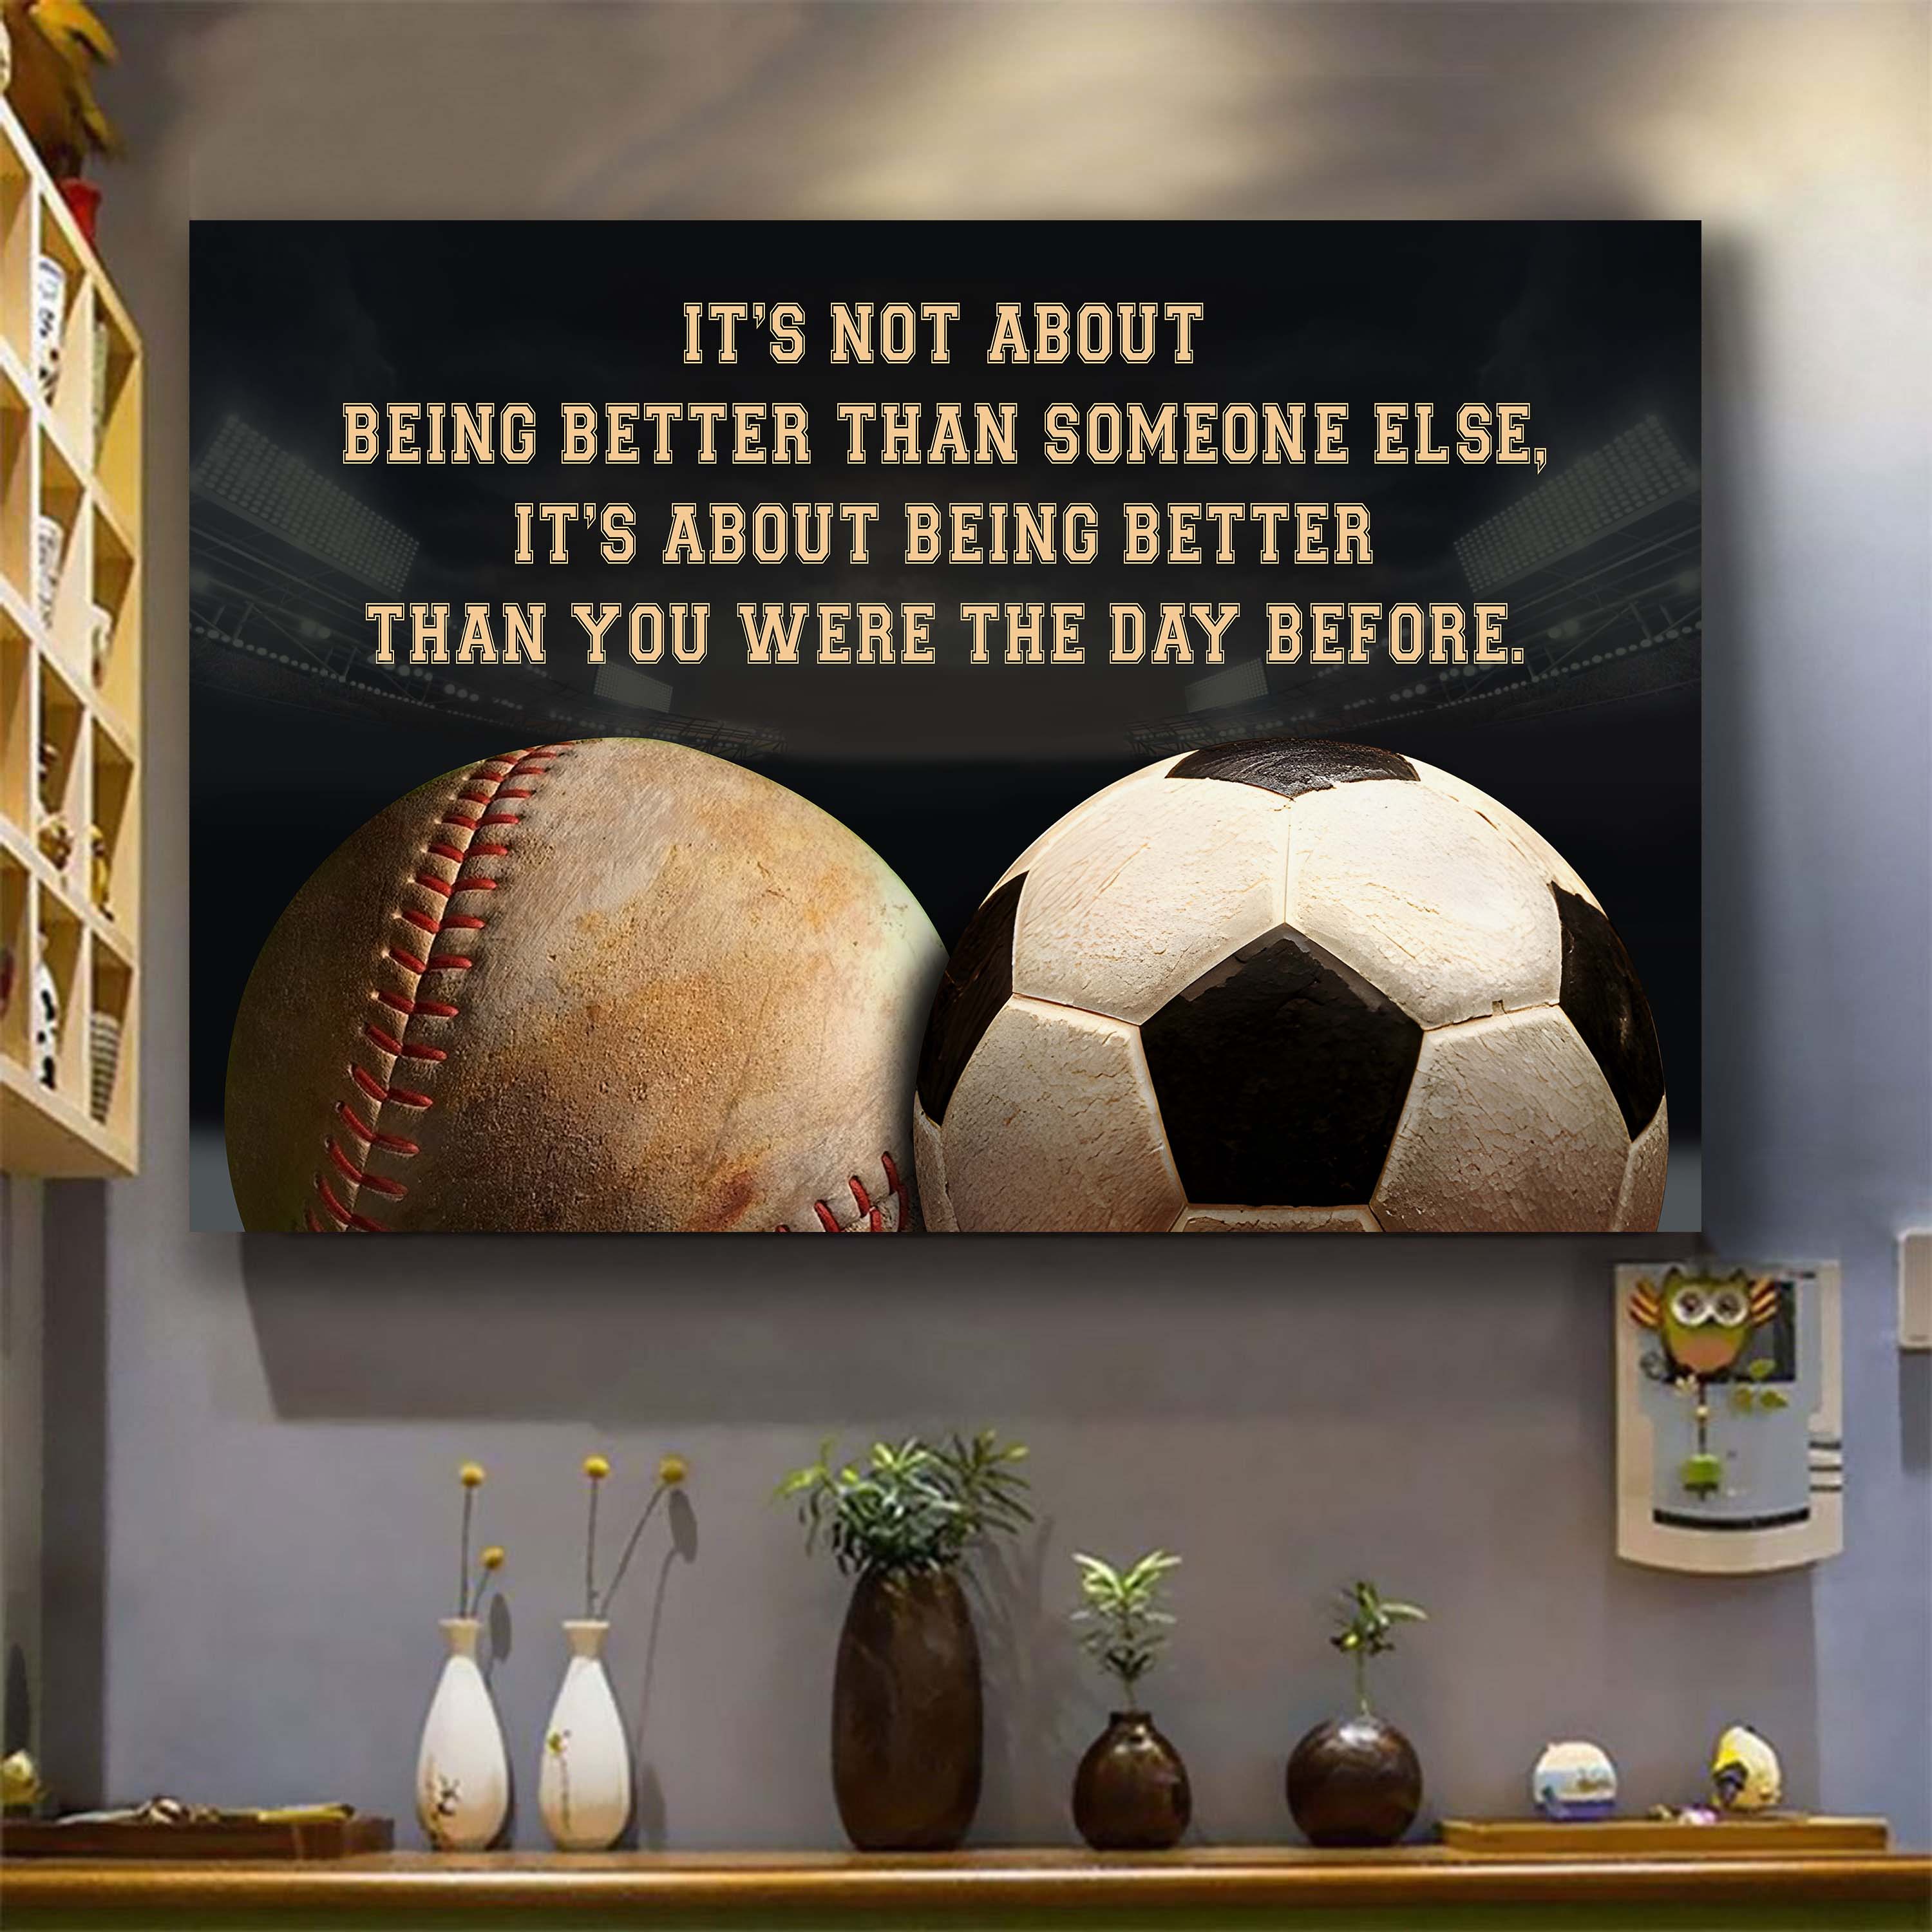 Soccer baseball customizable poster canvas - It is not about better than someone else, It is about being better than you were the day before